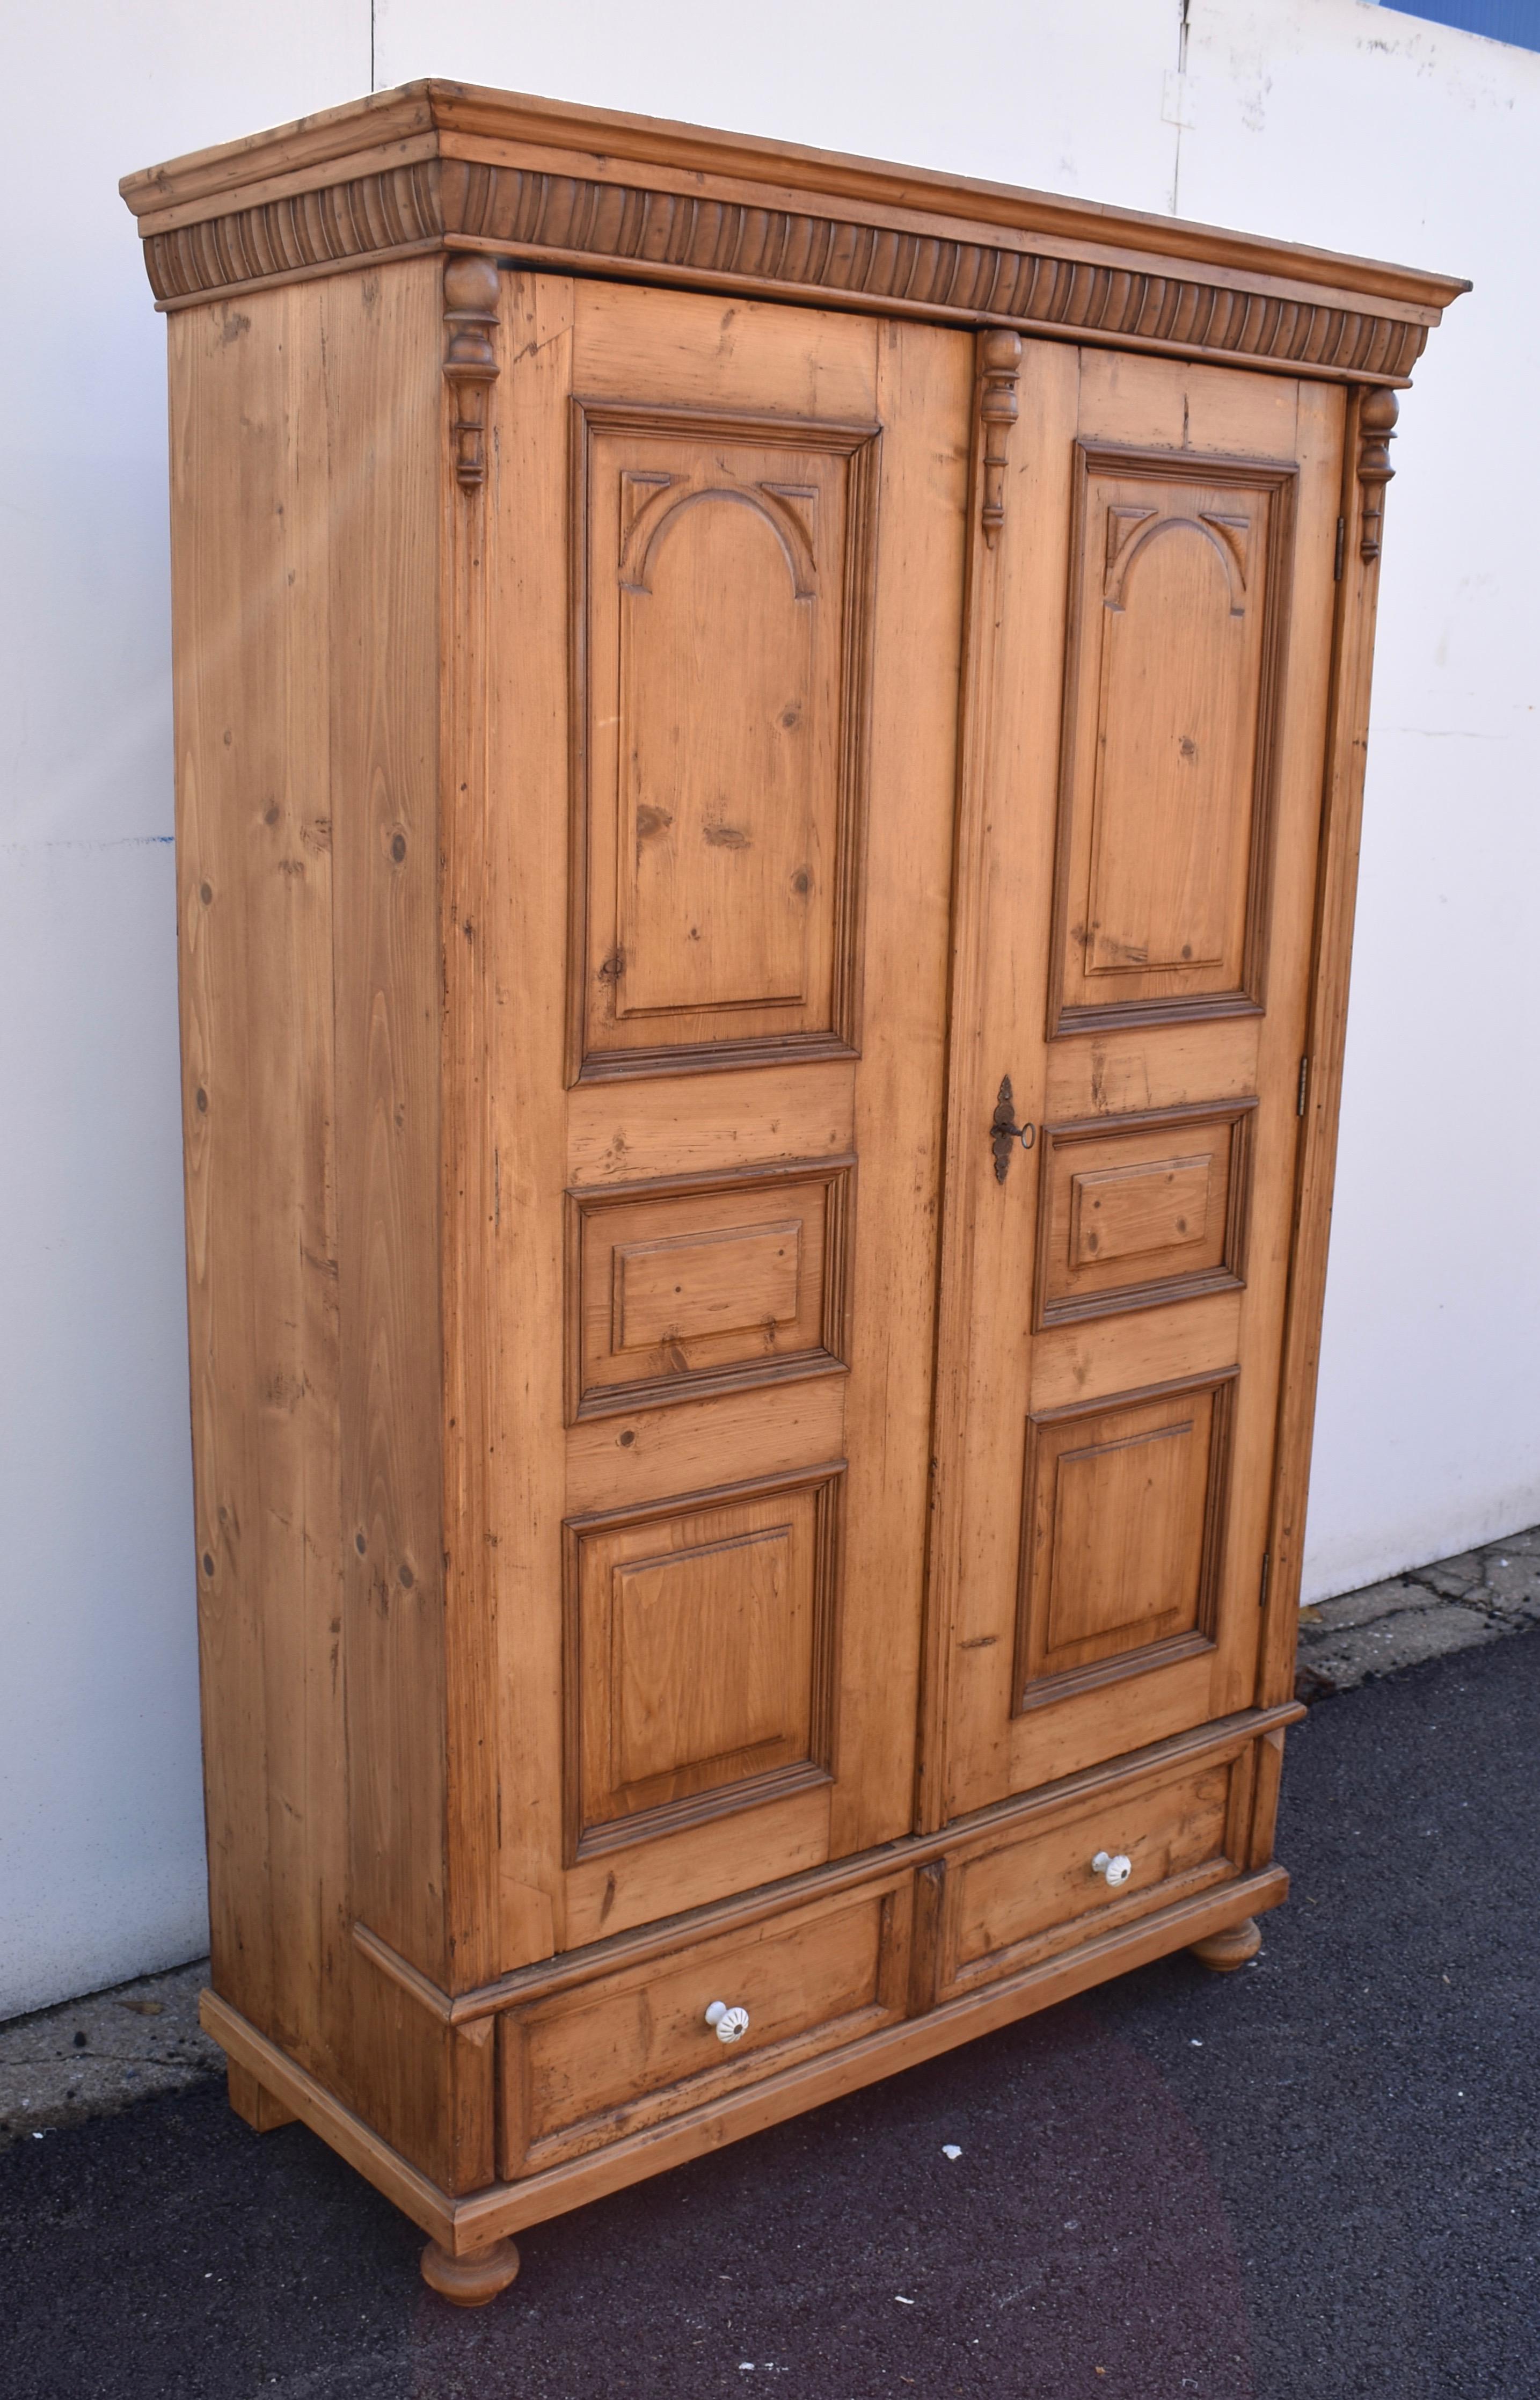 This is a small armoire with a great deal of presence.  The crown is bold with a pine ogee atop a deep tier of hardwood gadrooning.  Beneath are two doors, flanked and separated by fluting capped with hardwood split balusters.  Each door has three